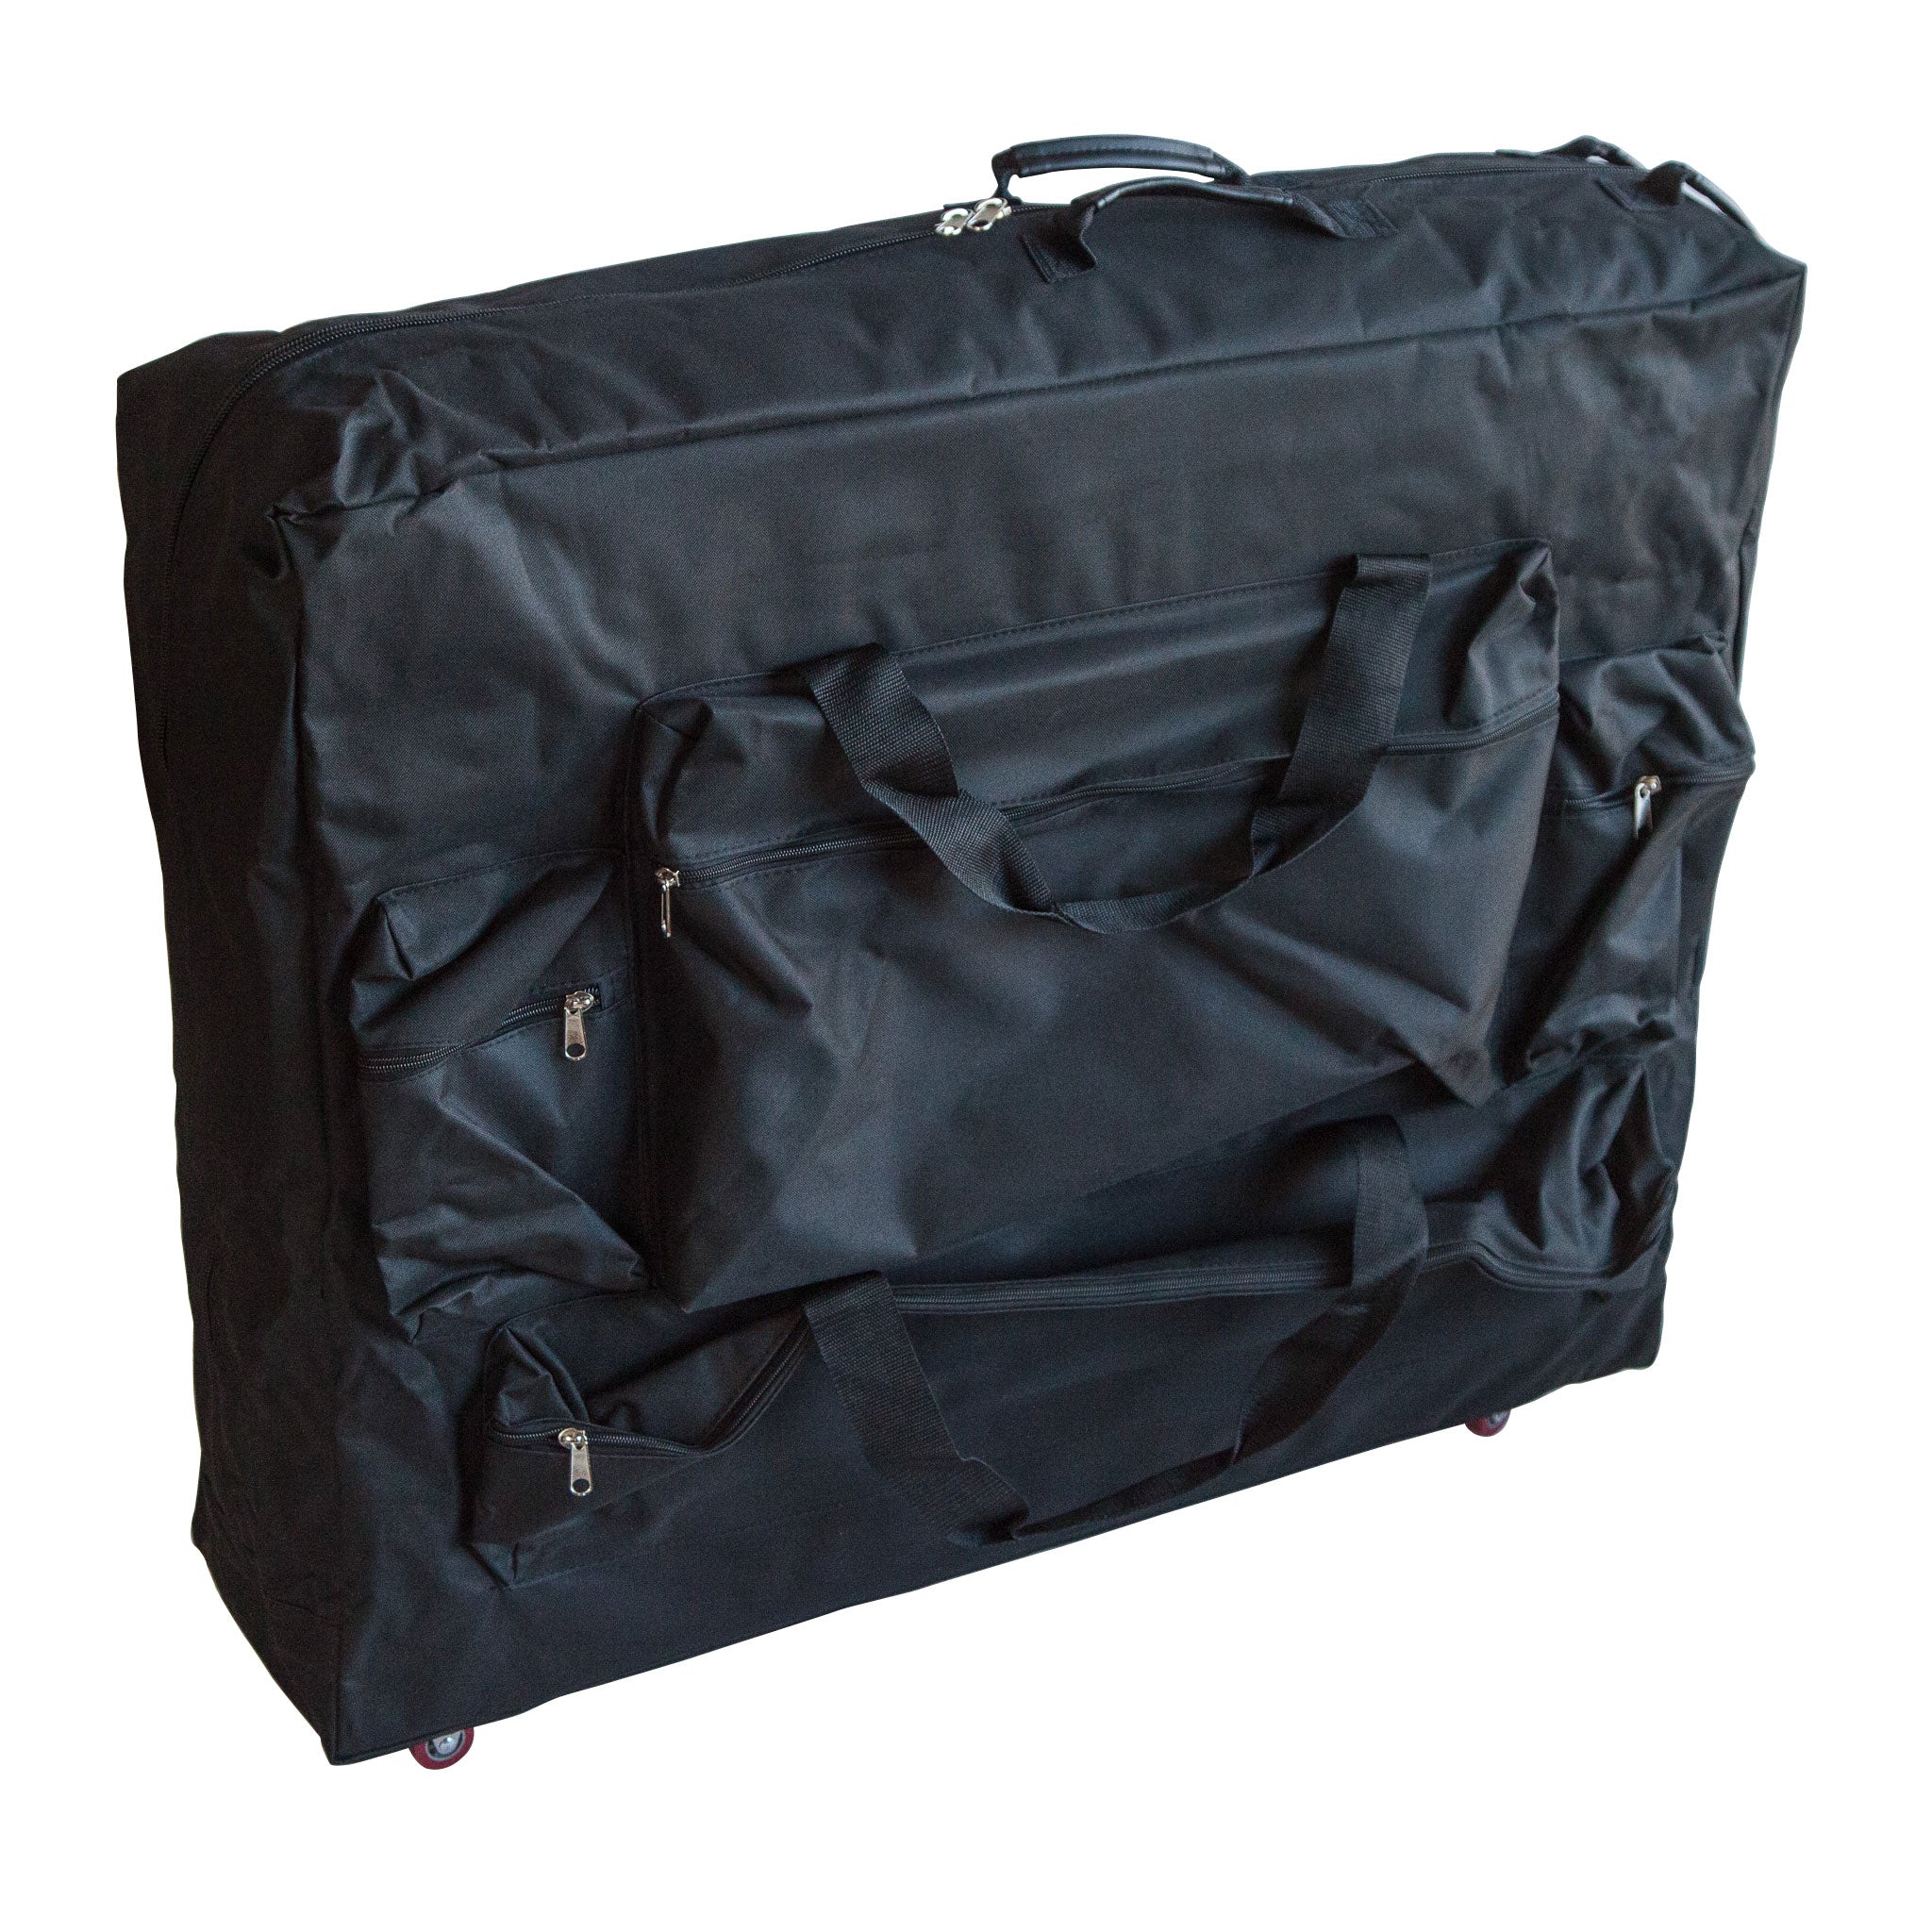 Carrying Case With Wheels - Fits 28" - 30" Tables